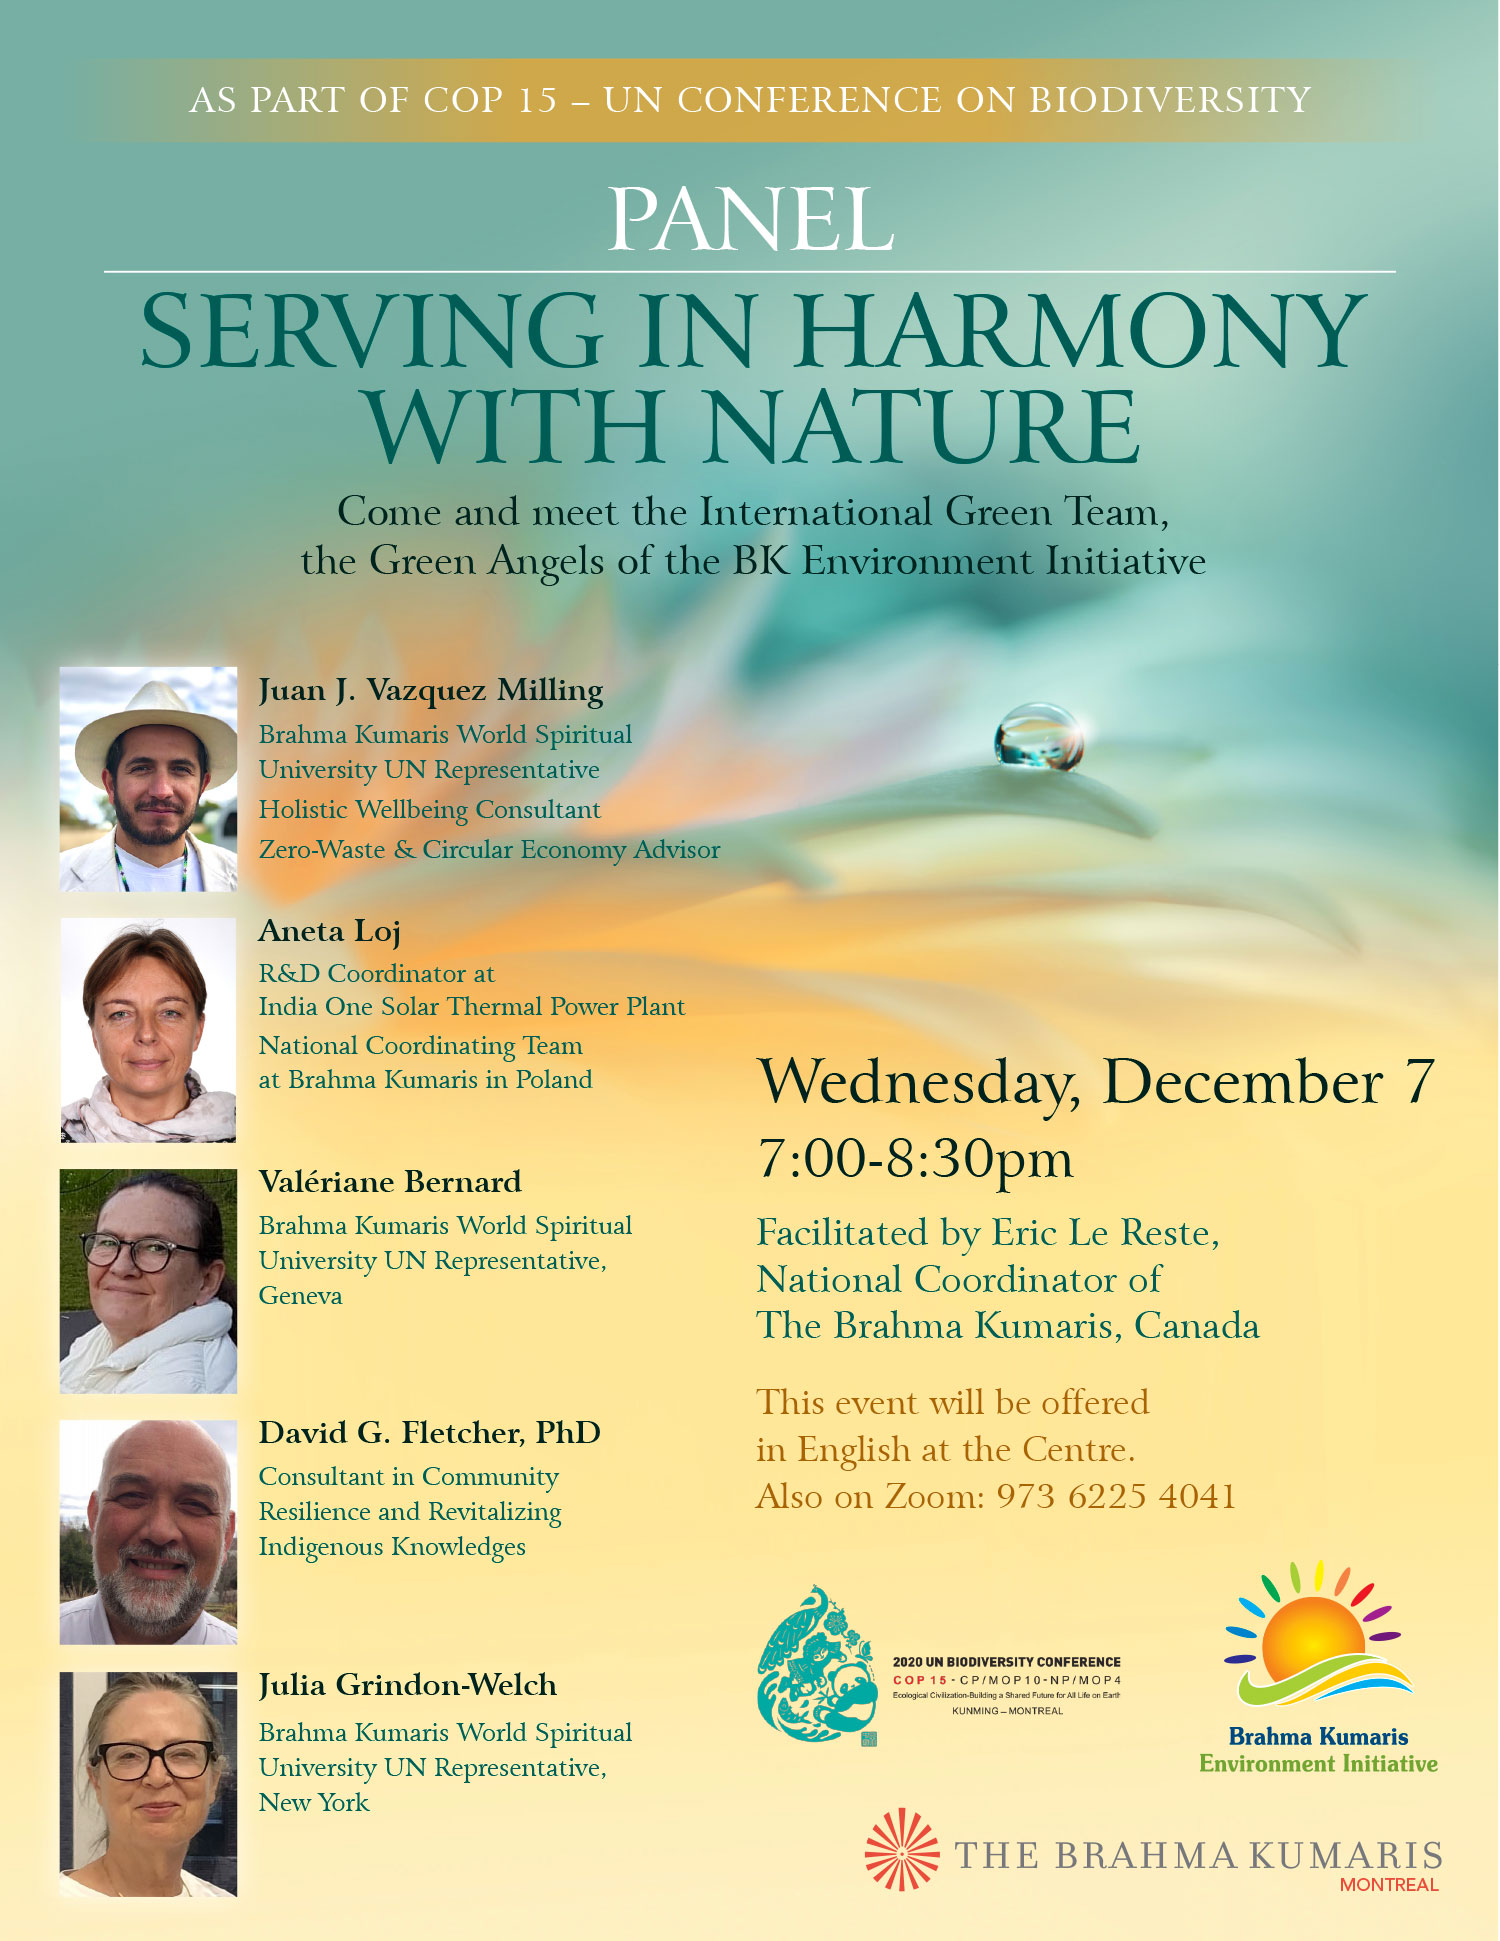 COP15 Biodiversity Panel - Serving in Harmony with Nature